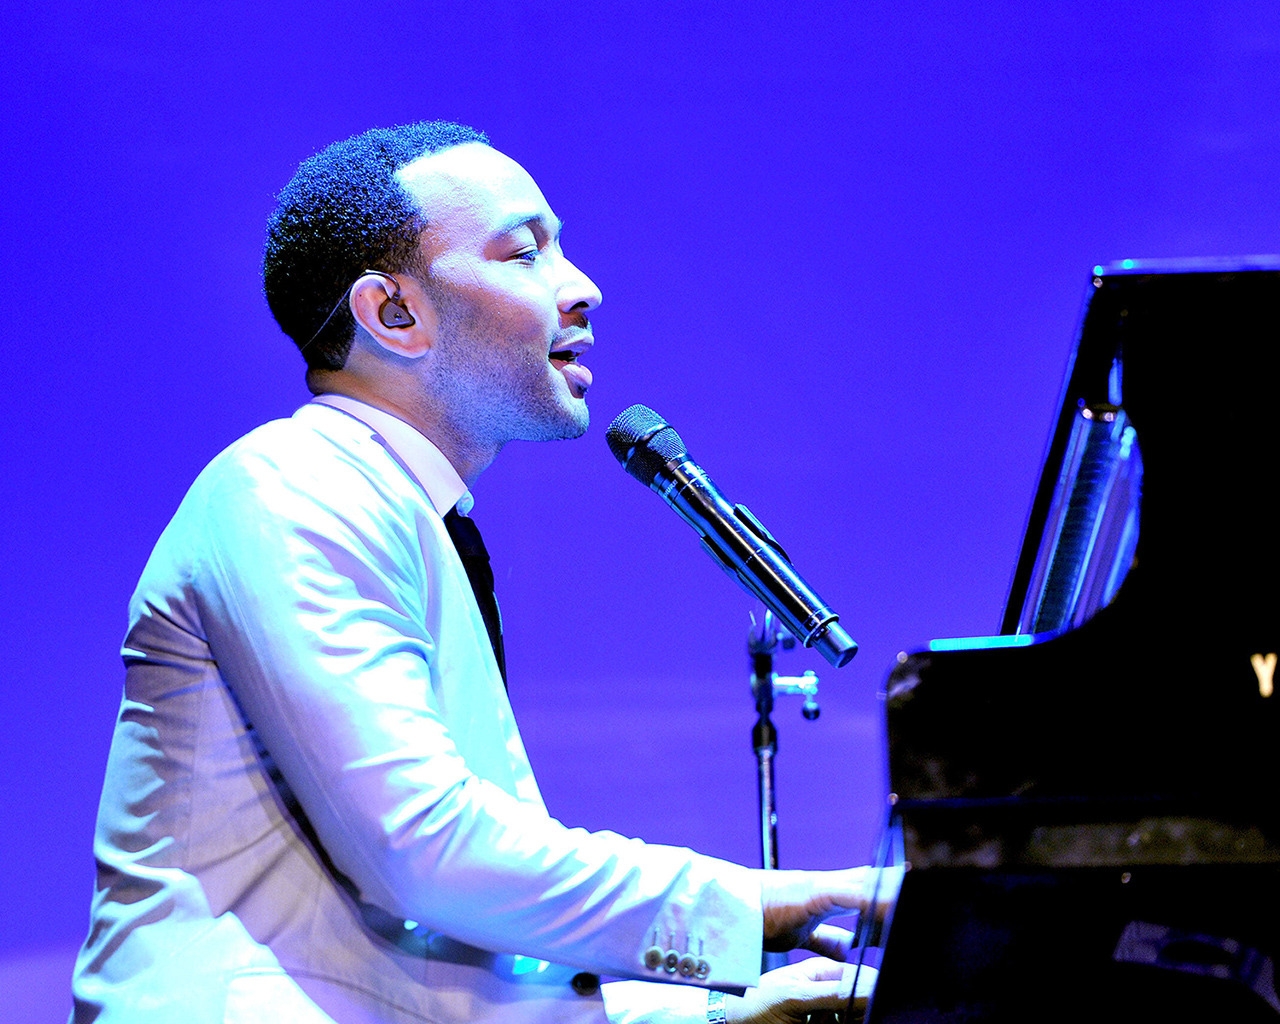 John Legend at Piano for 1280 x 1024 resolution